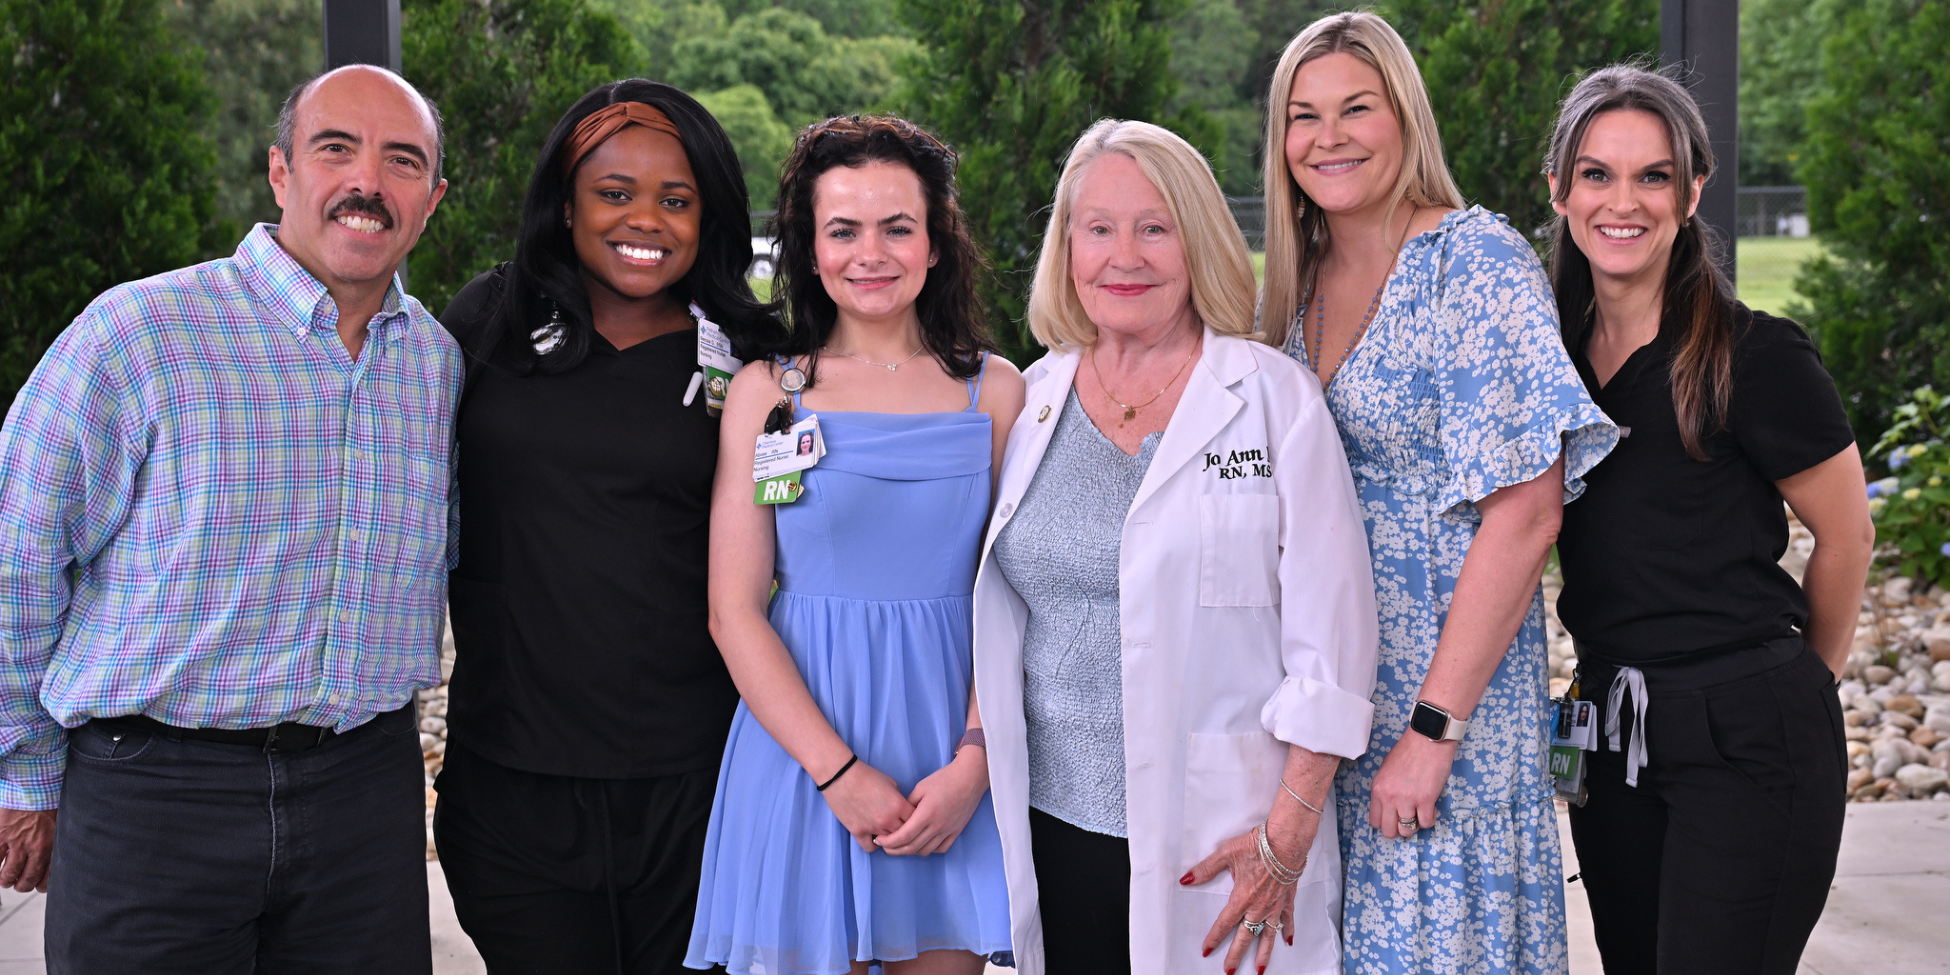 Outstanding nurses honored with DAISY, McMillan awards for excellent patient care